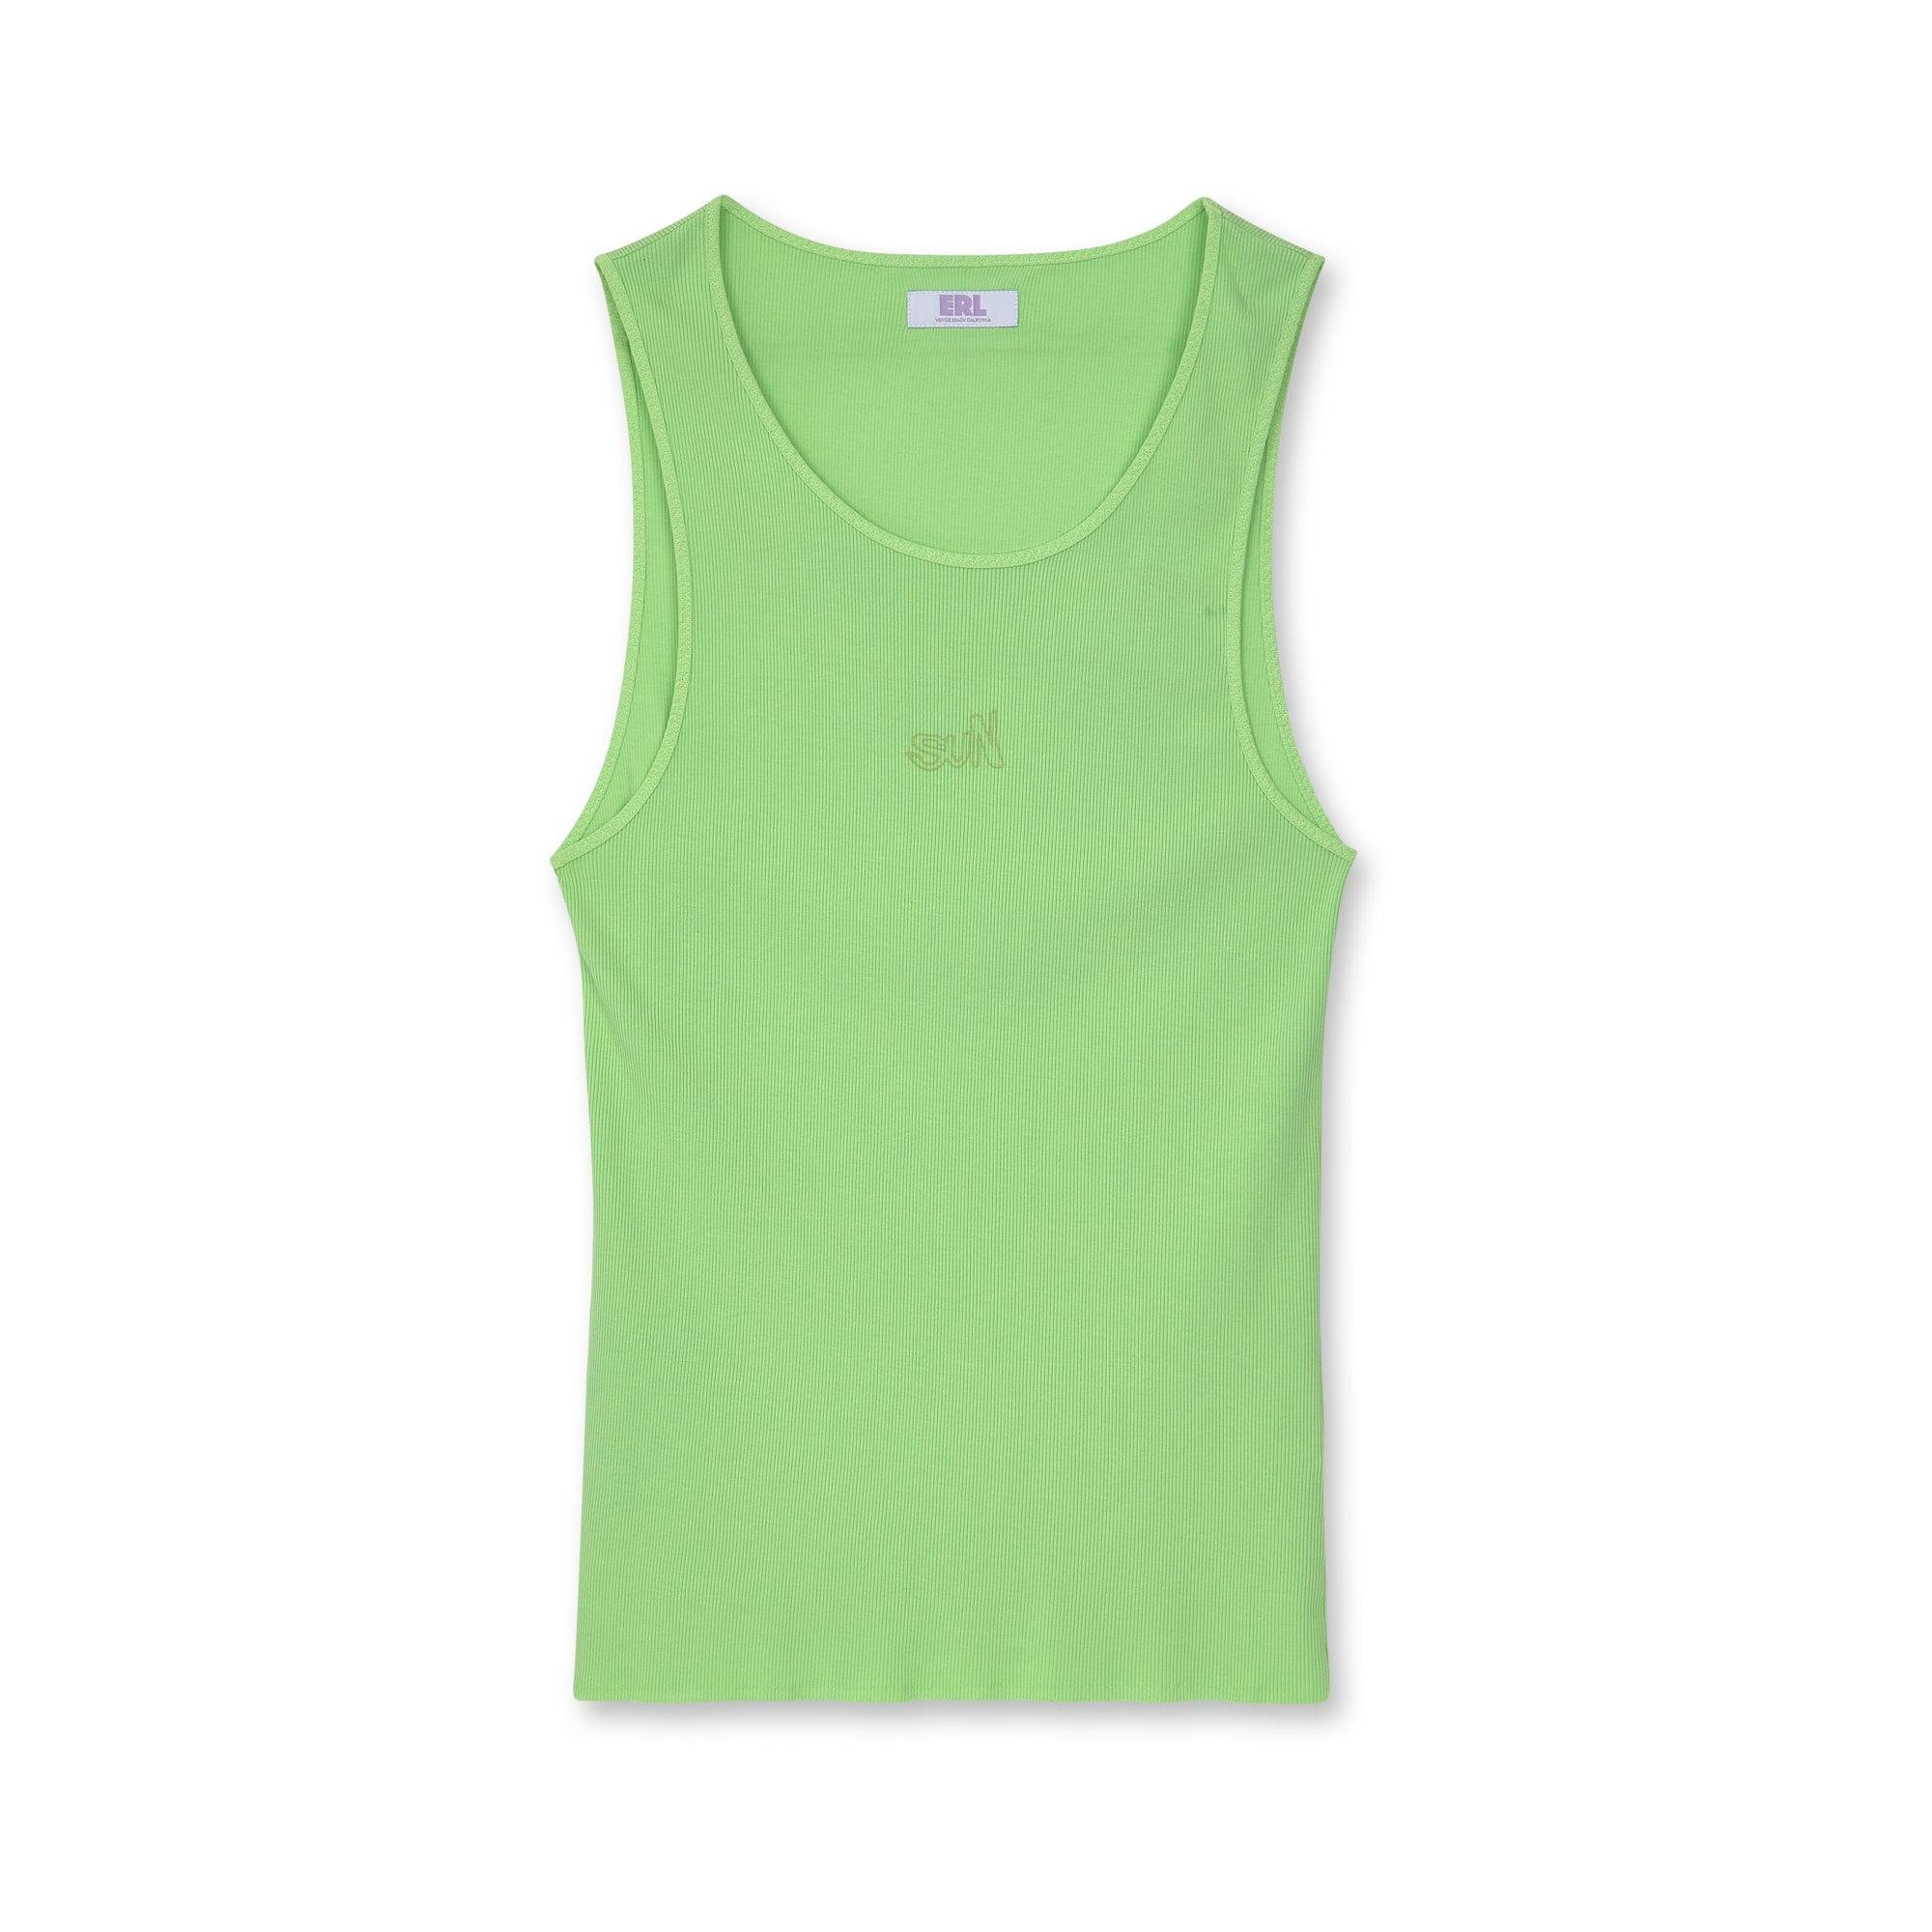 ERL - Men's Rib Knit Tank Top - (Lime) by ERL